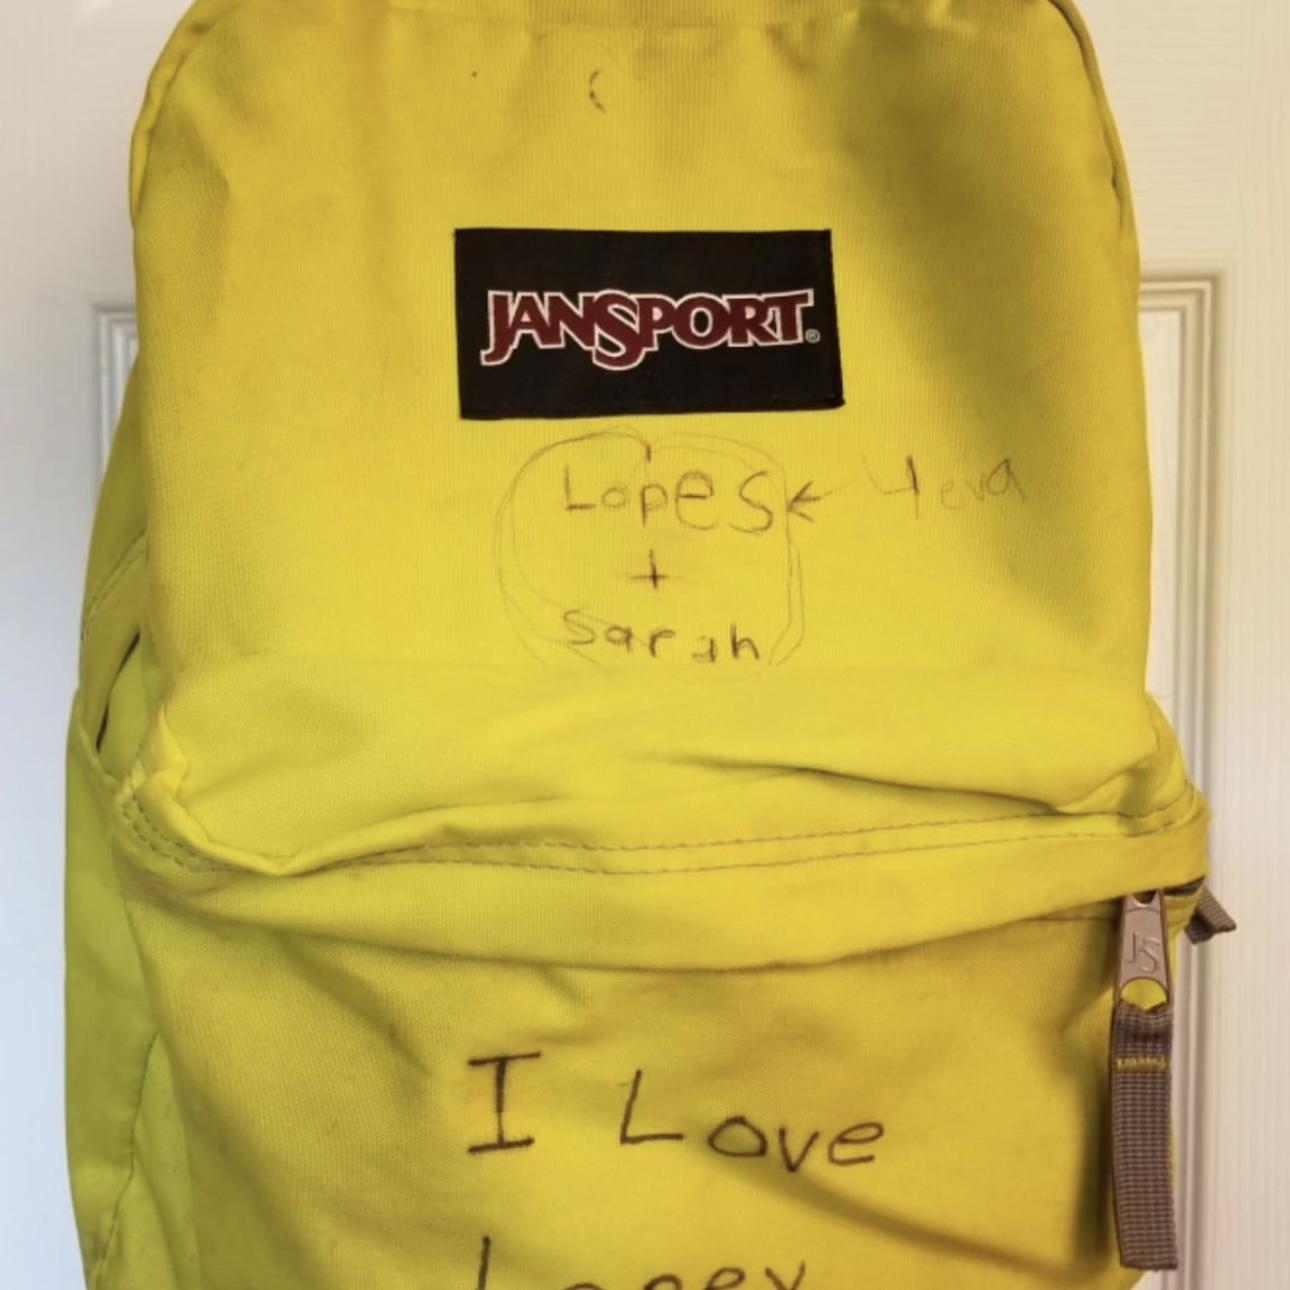 Sarah’s bright yellow backpack that David wrote “I LOVE LOPEY” all over before they ever actually dating. talk about speaking it into existence!!